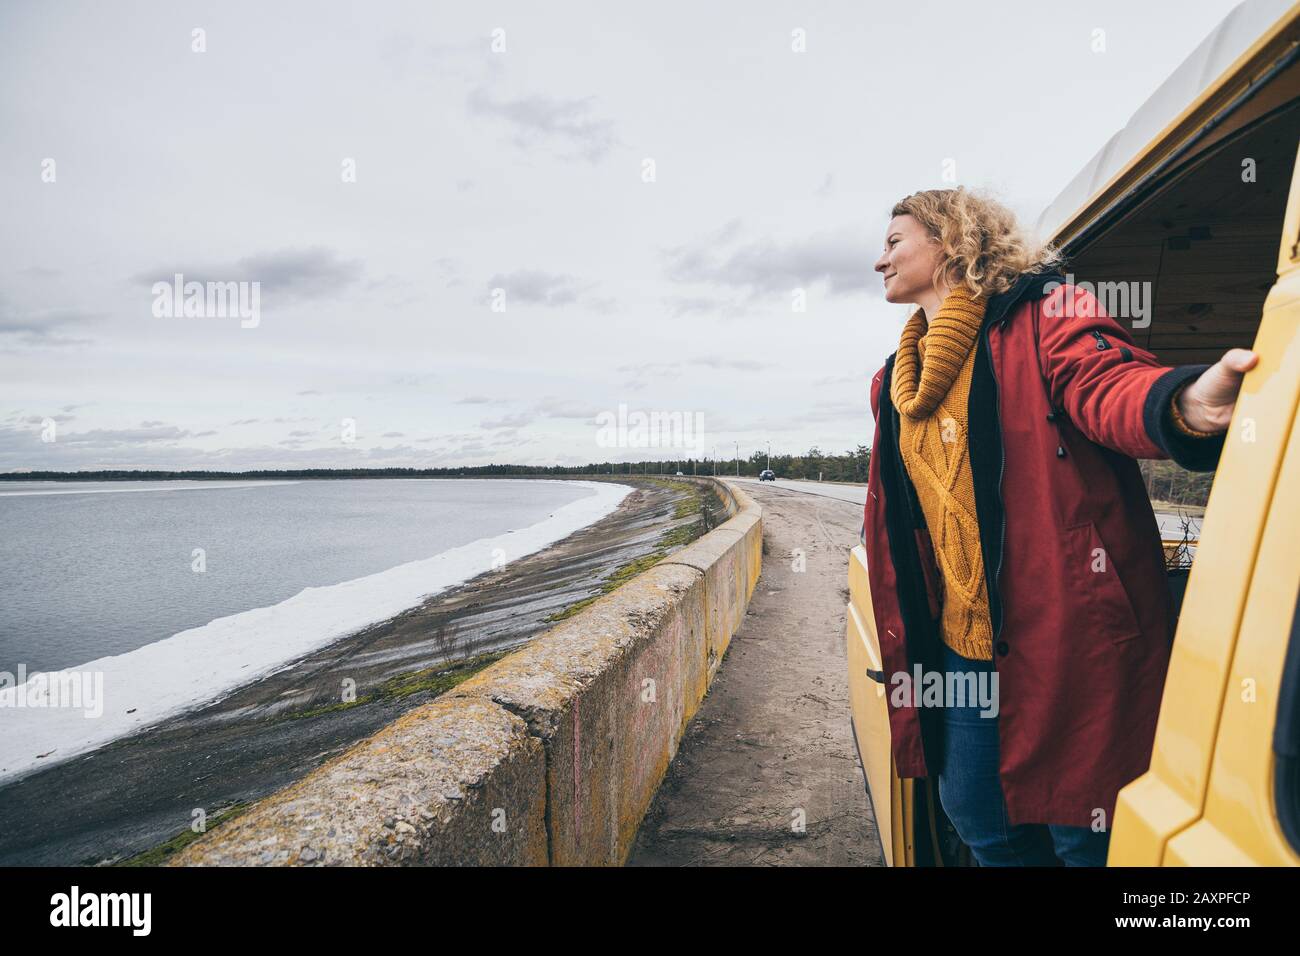 Young blond woman looking out of camper van overlooking the frozen winter sea Stock Photo